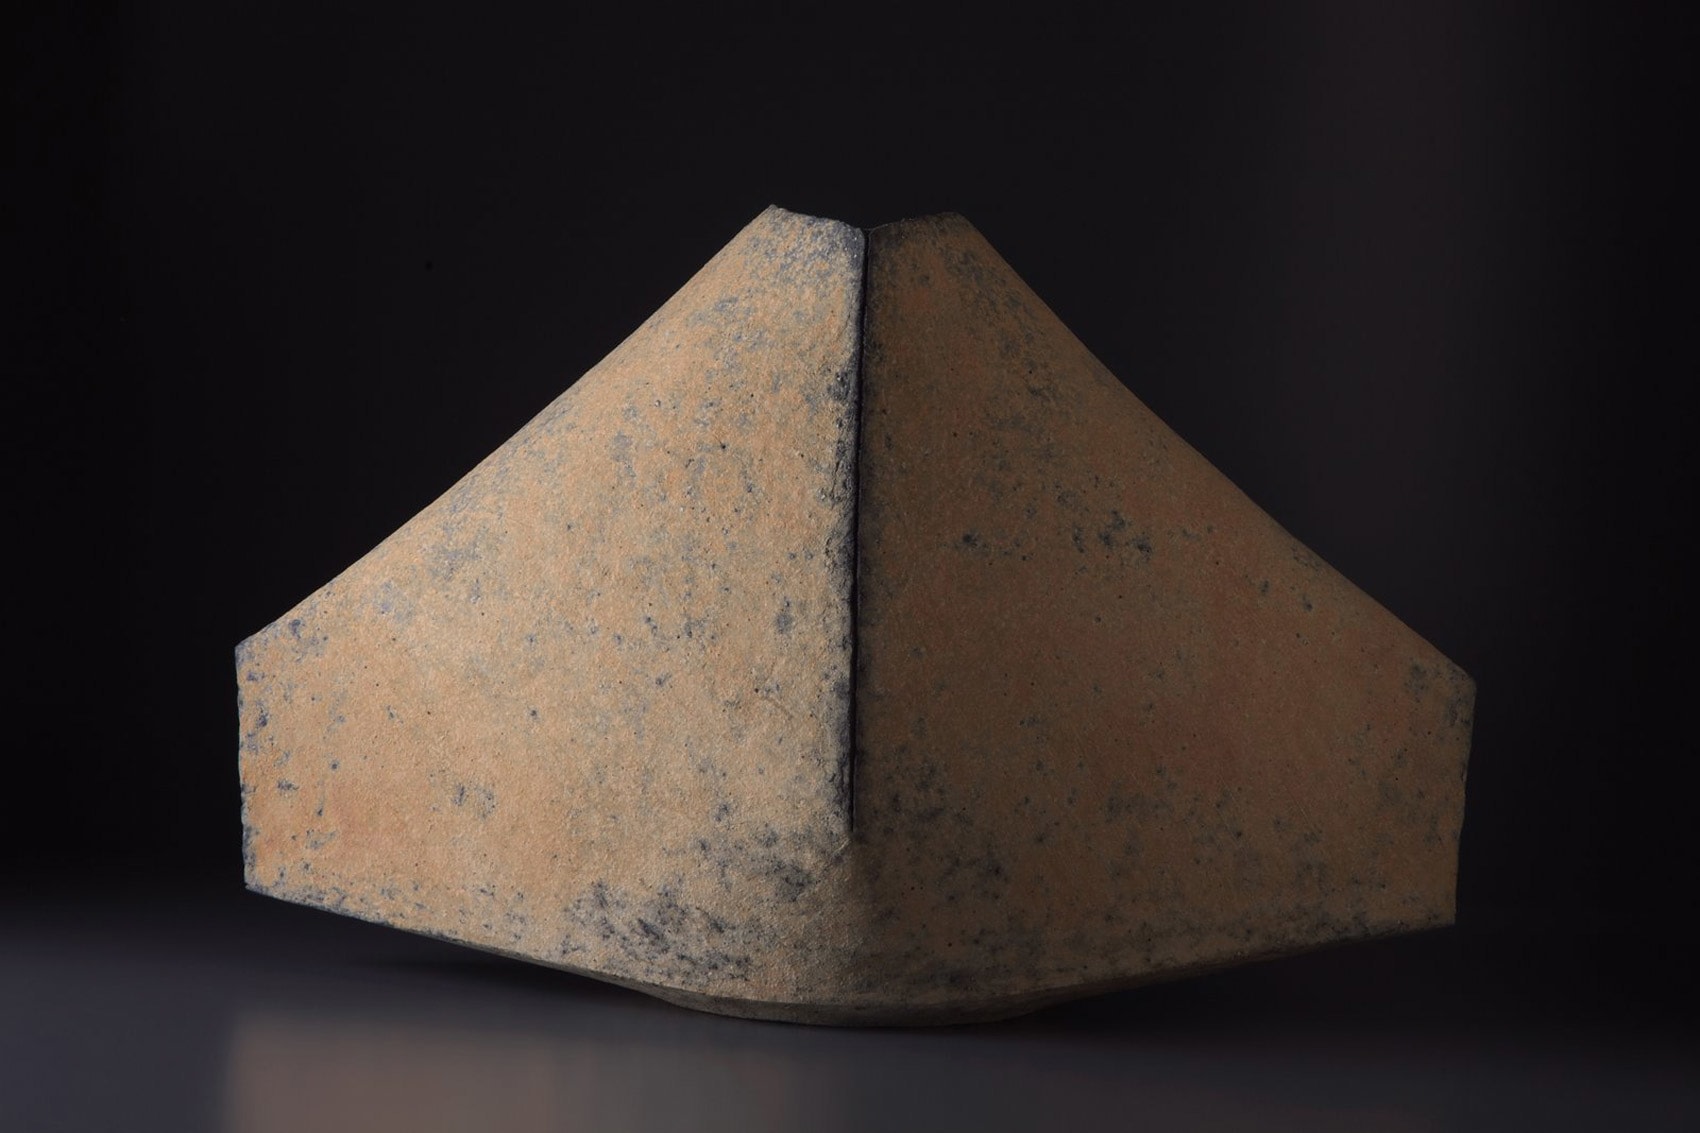 Multi-ﬁred mountain shaped vessel, scored vertical line and surface colorations, peach and #11 blue tones